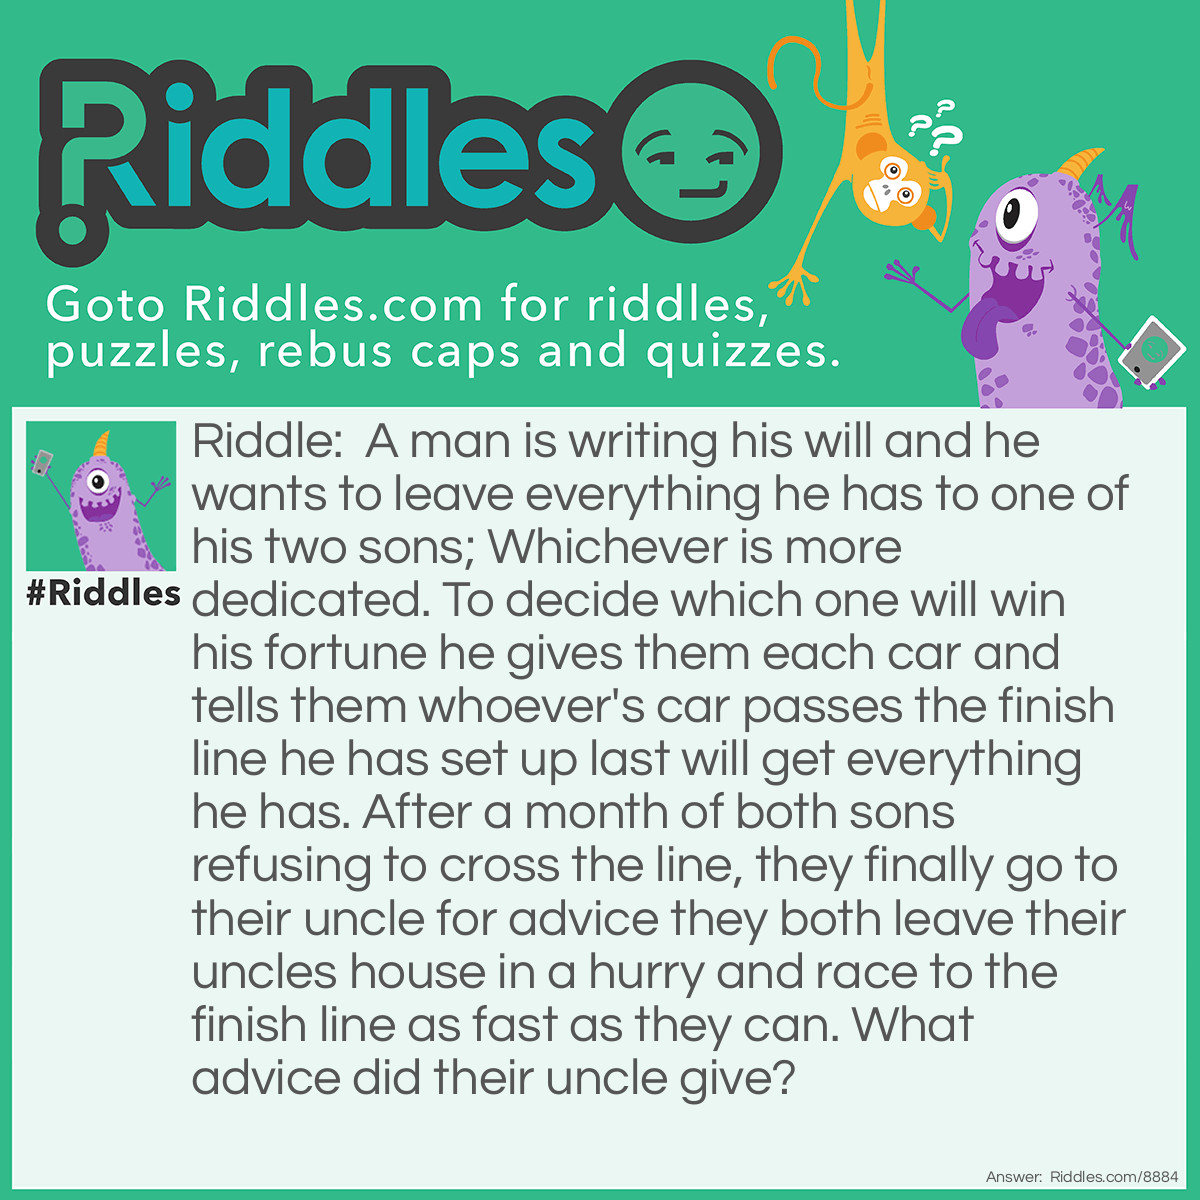 Riddle: A man is writing his will and he wants to leave everything he has to one of his two sons; Whichever is more dedicated. To decide which one will win his fortune he gives them each car and tells them whoever's car passes the finish line he has set up last will get everything he has. After a month of both sons refusing to cross the line, they finally go to their uncle for advice they both leave their uncles house in a hurry and race to the finish line as fast as they can. What advice did their uncle give? Answer: Their uncle told them to switch cars.